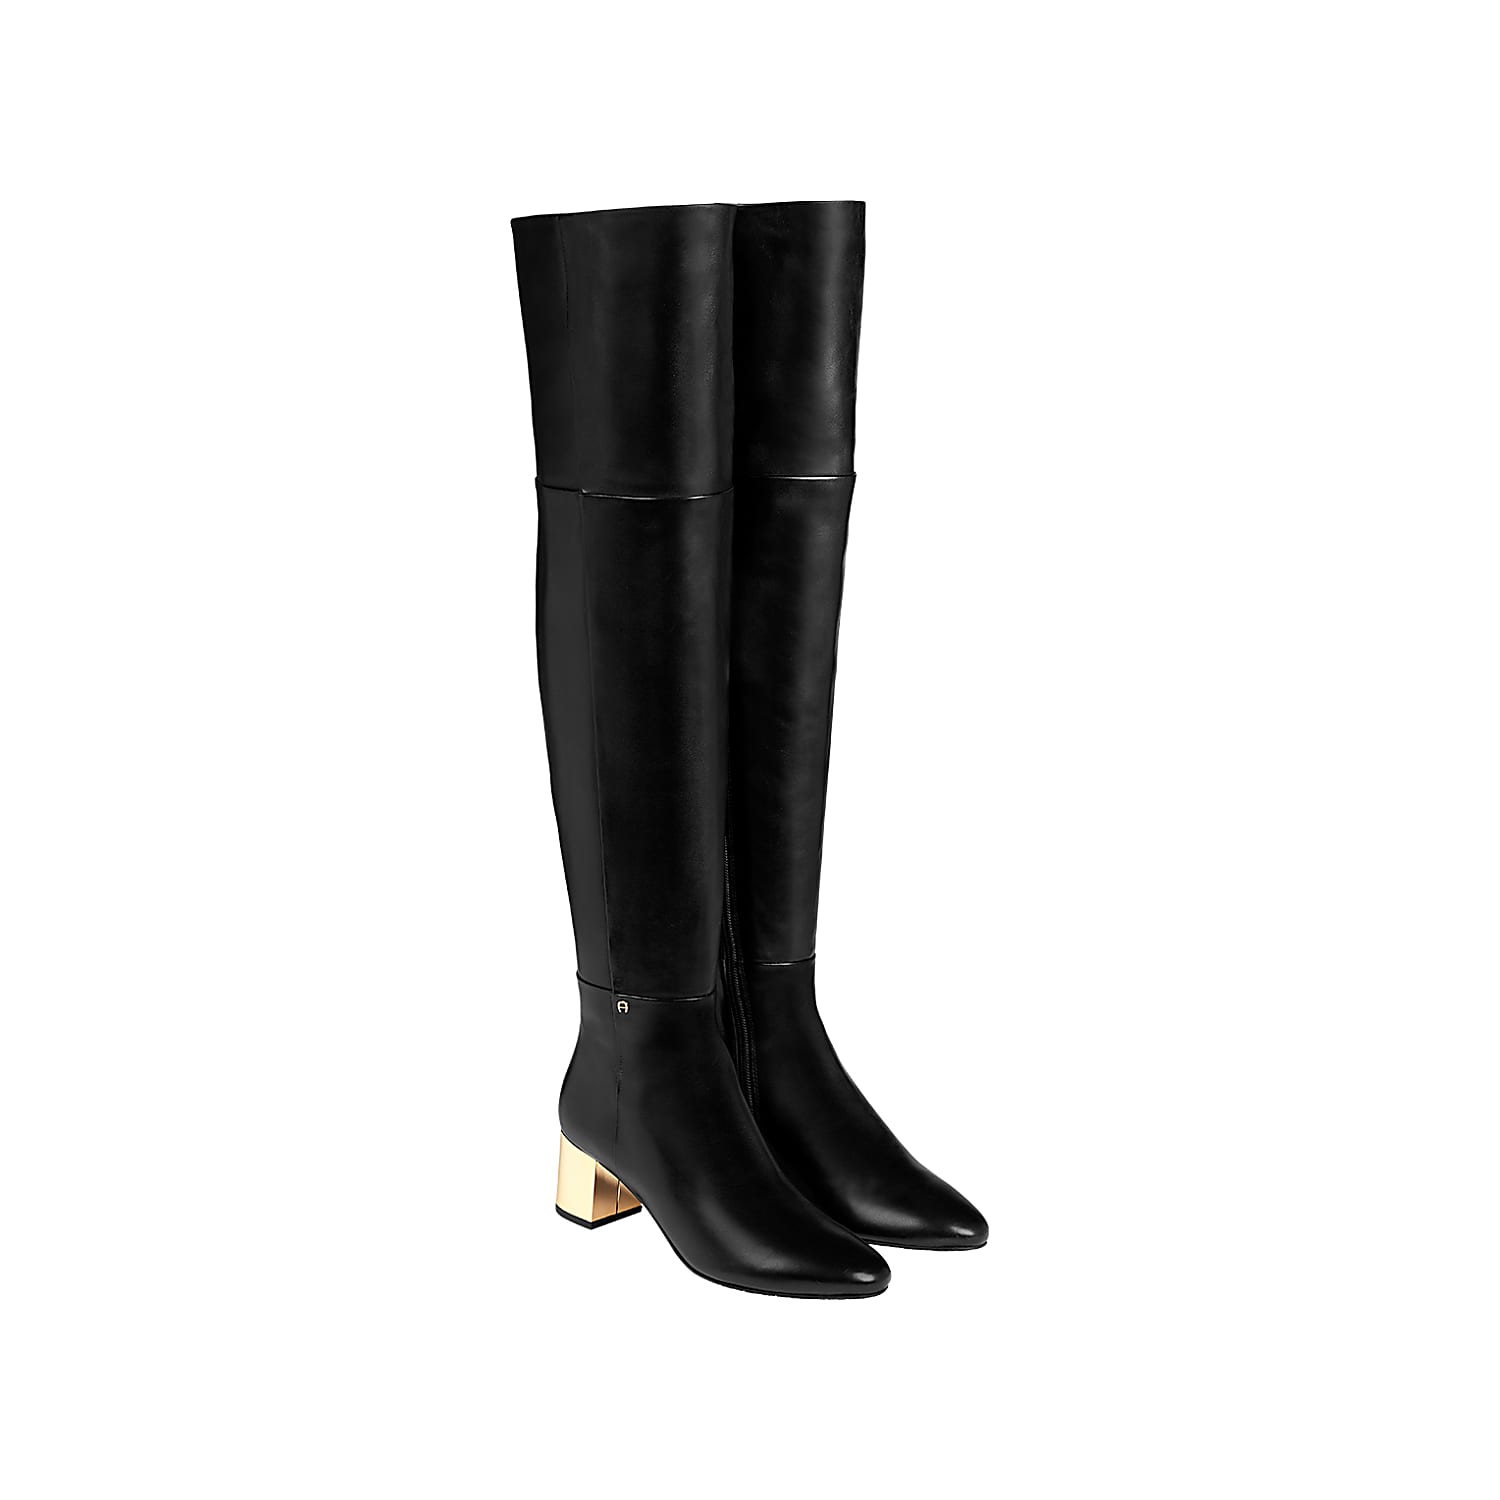 Sarah over-the-knee boot